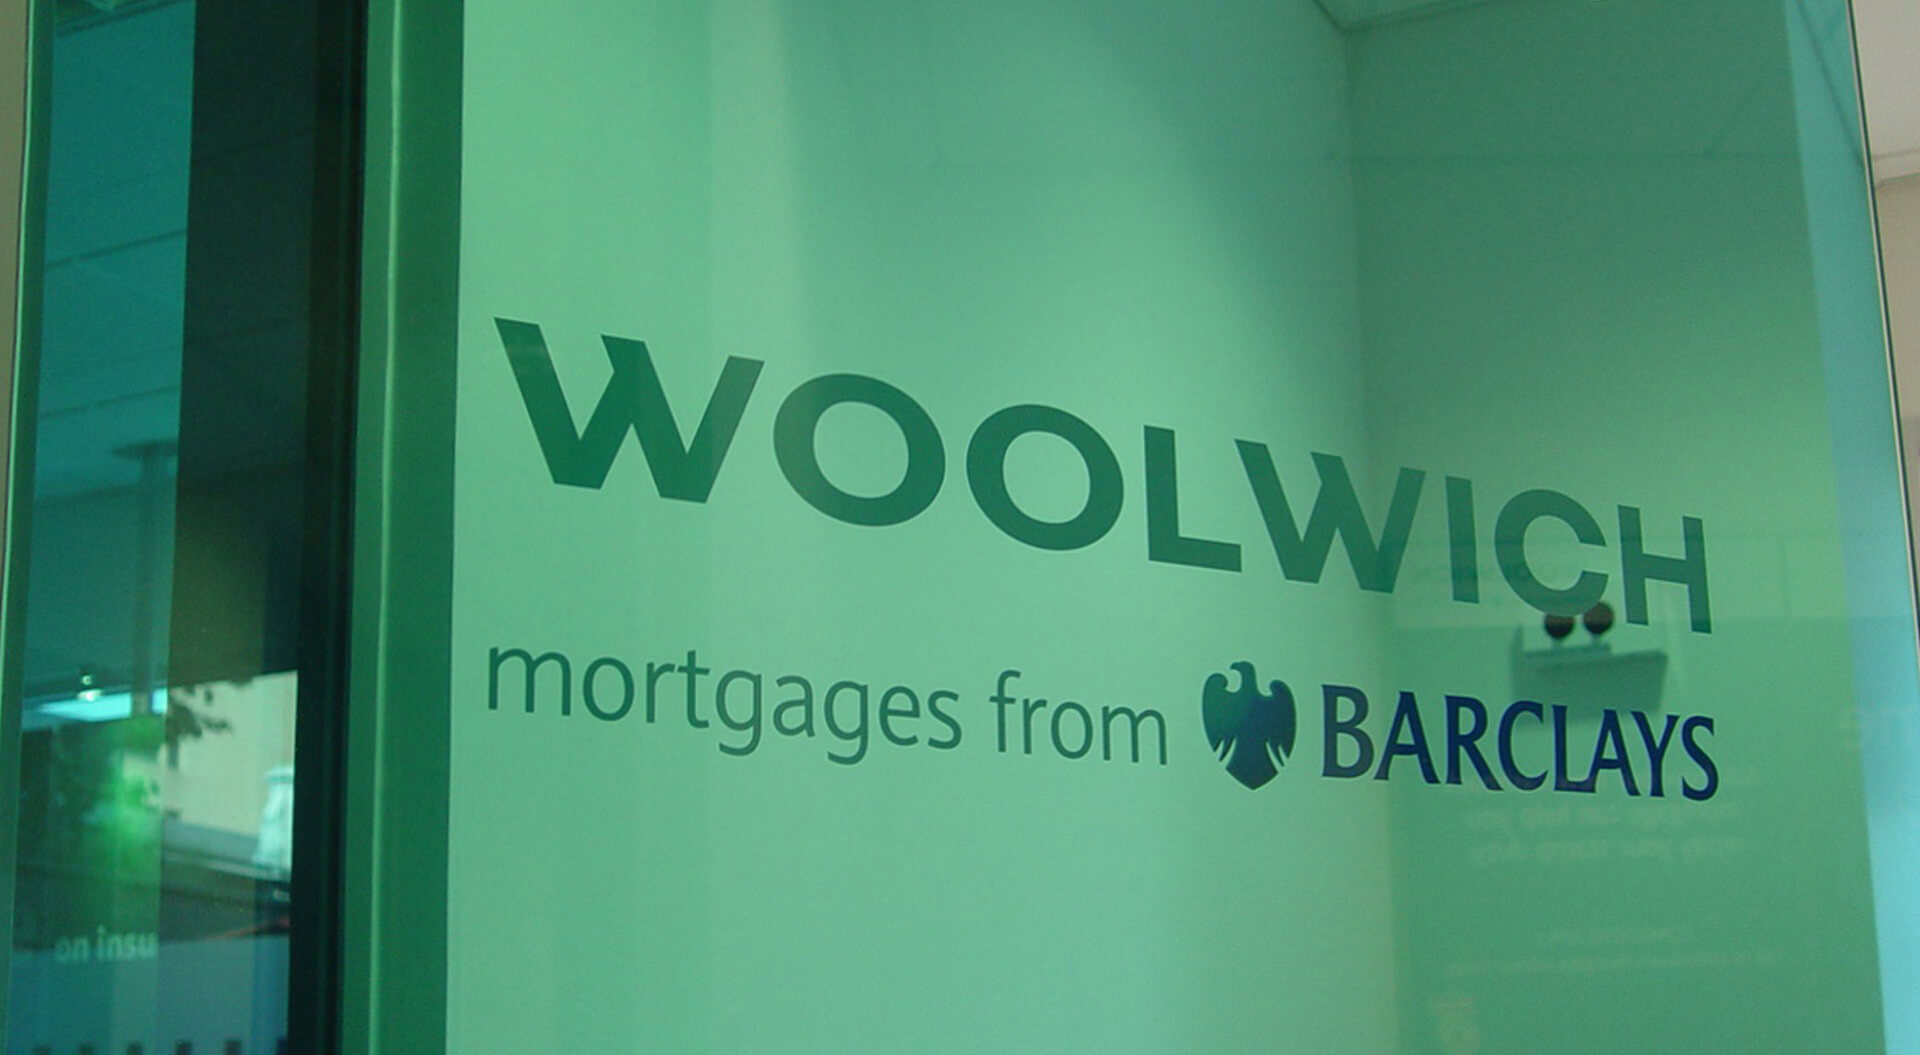 Woolwich mortgage sub branding, Barclays bank retail branch network